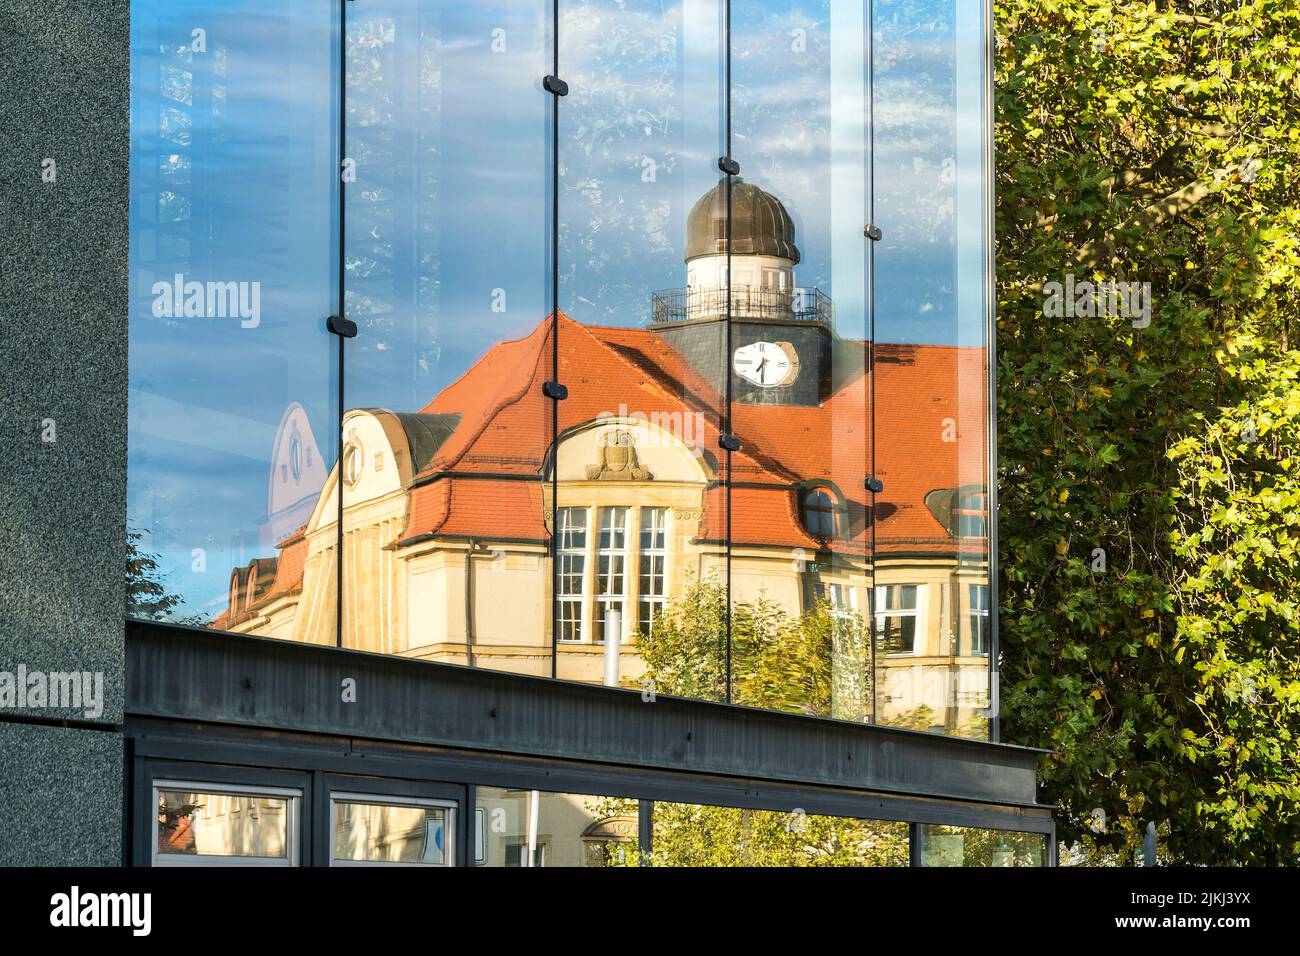 Germany, Saxony-Anhalt, Dessau, Anhalt University of Applied Sciences, Bill House, reflection of the campus main building Stock Photo